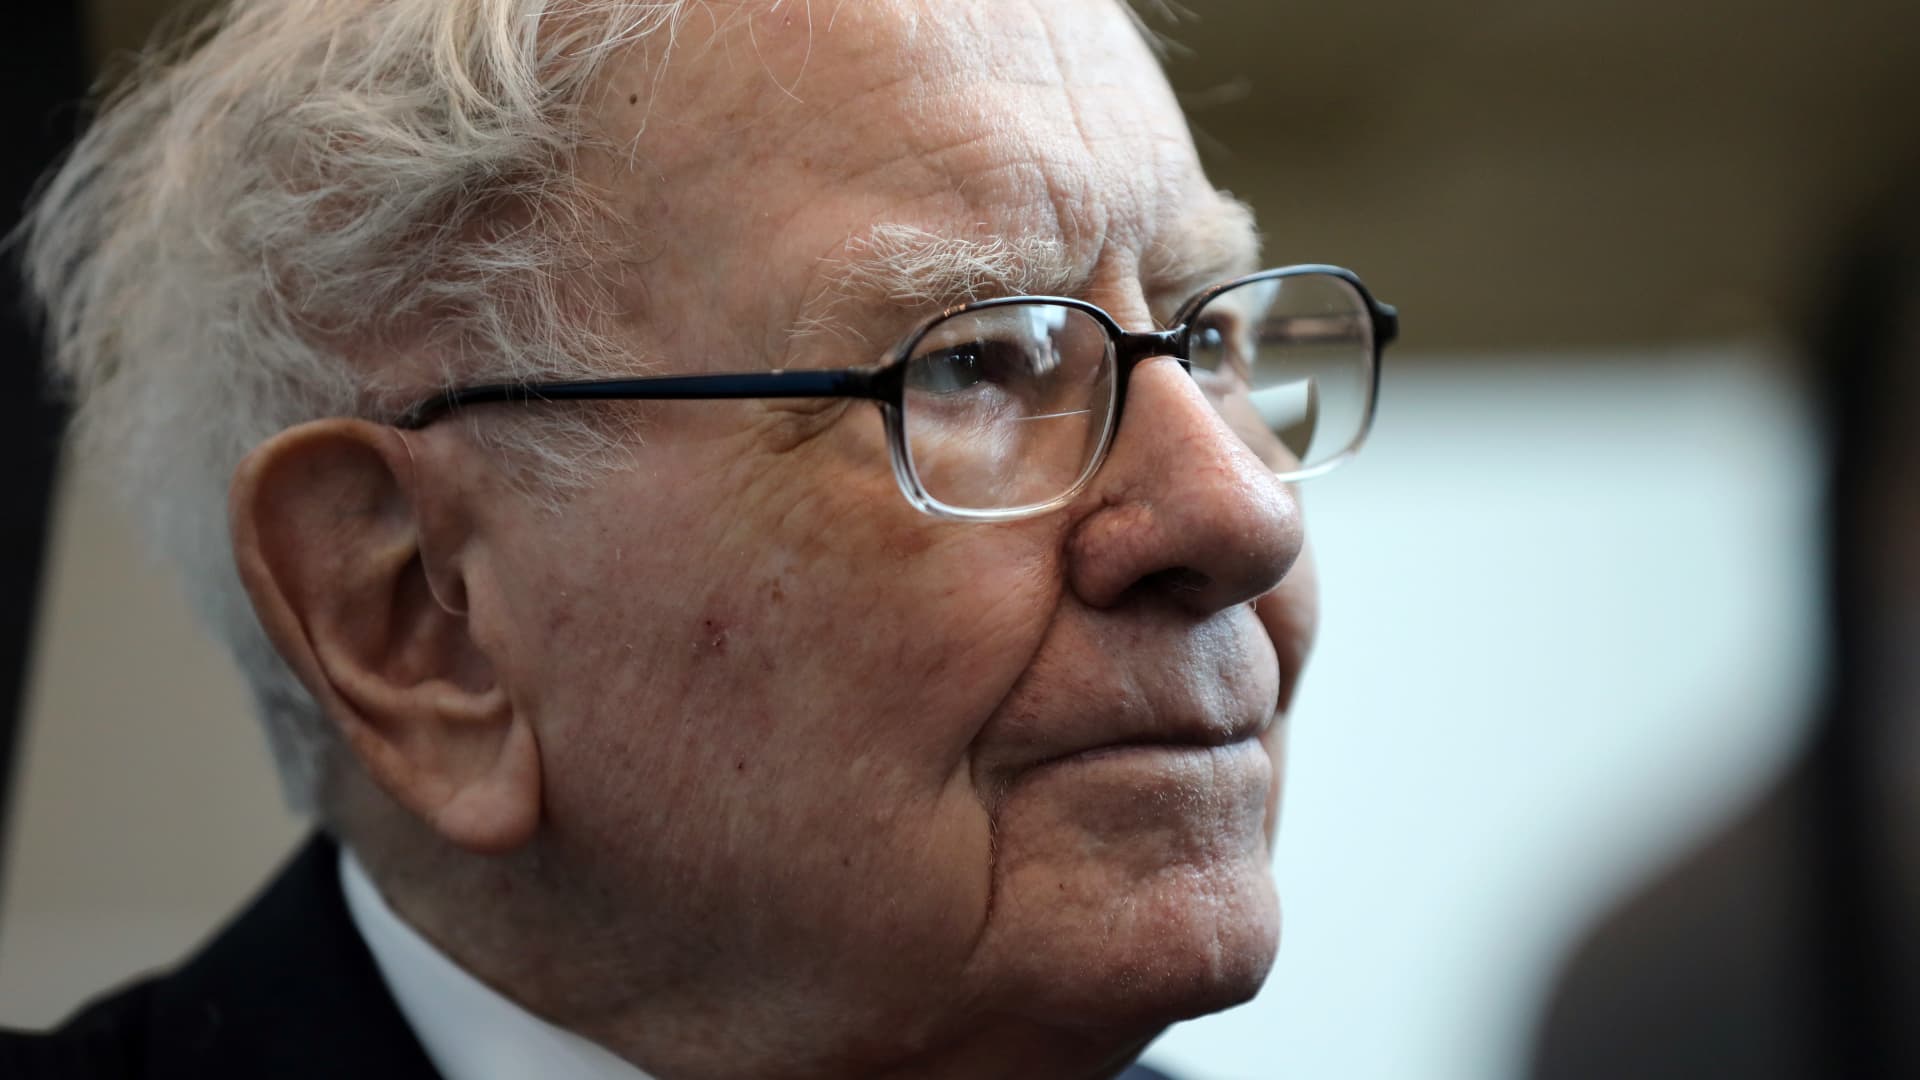 Warren Buffett's exit from airline stocks is a wake-up call for index investors, Jim Cramer says